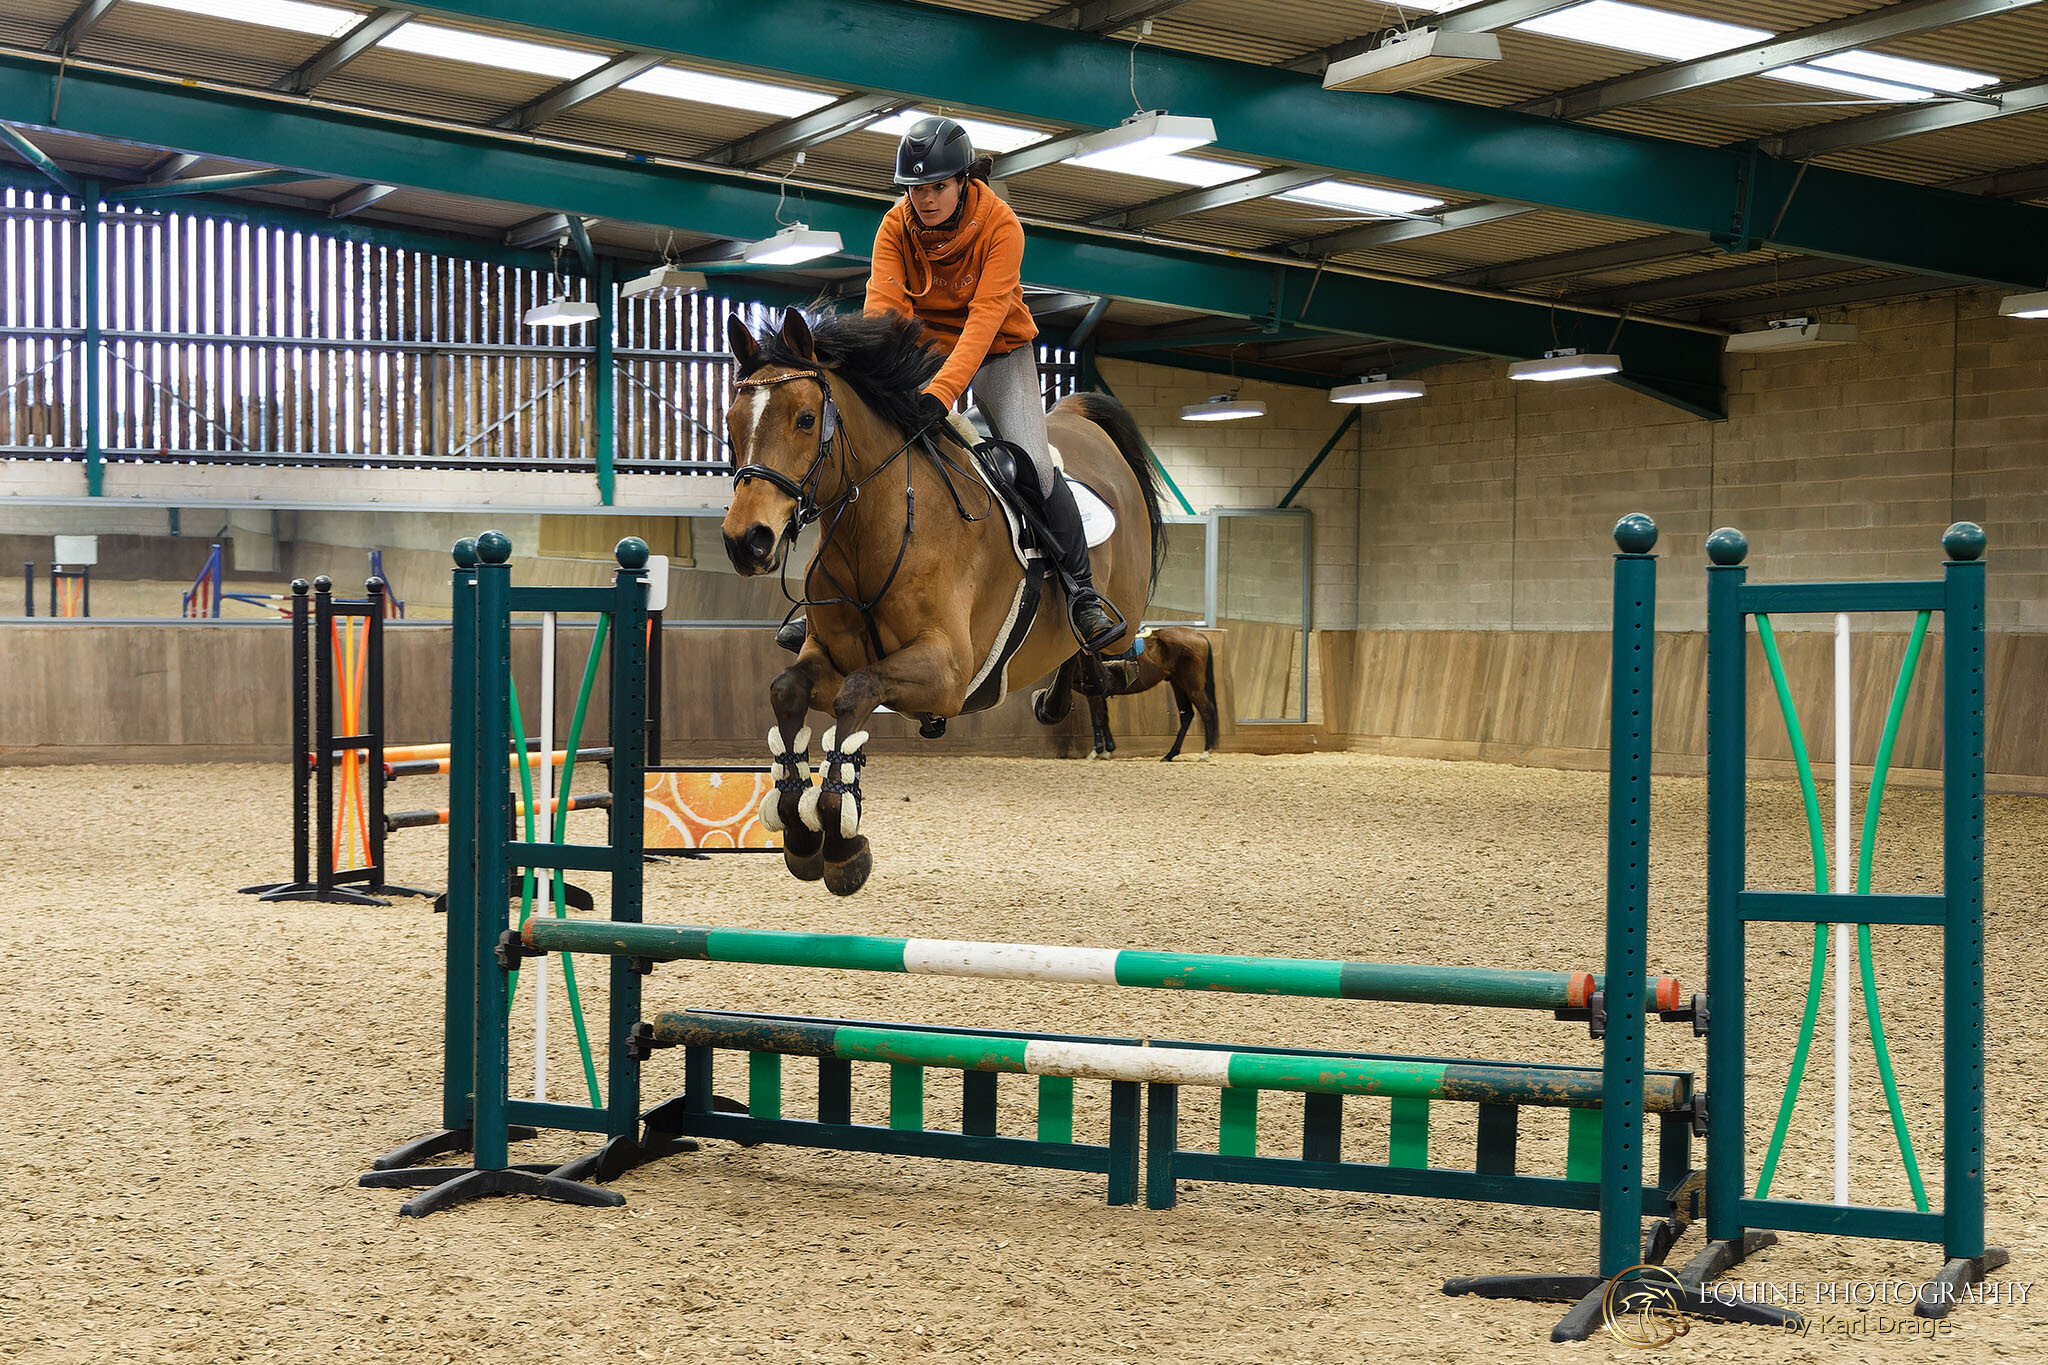 A gelding soars over a pole during an indoor arena hire session at Moulton College Equestrian Centre.